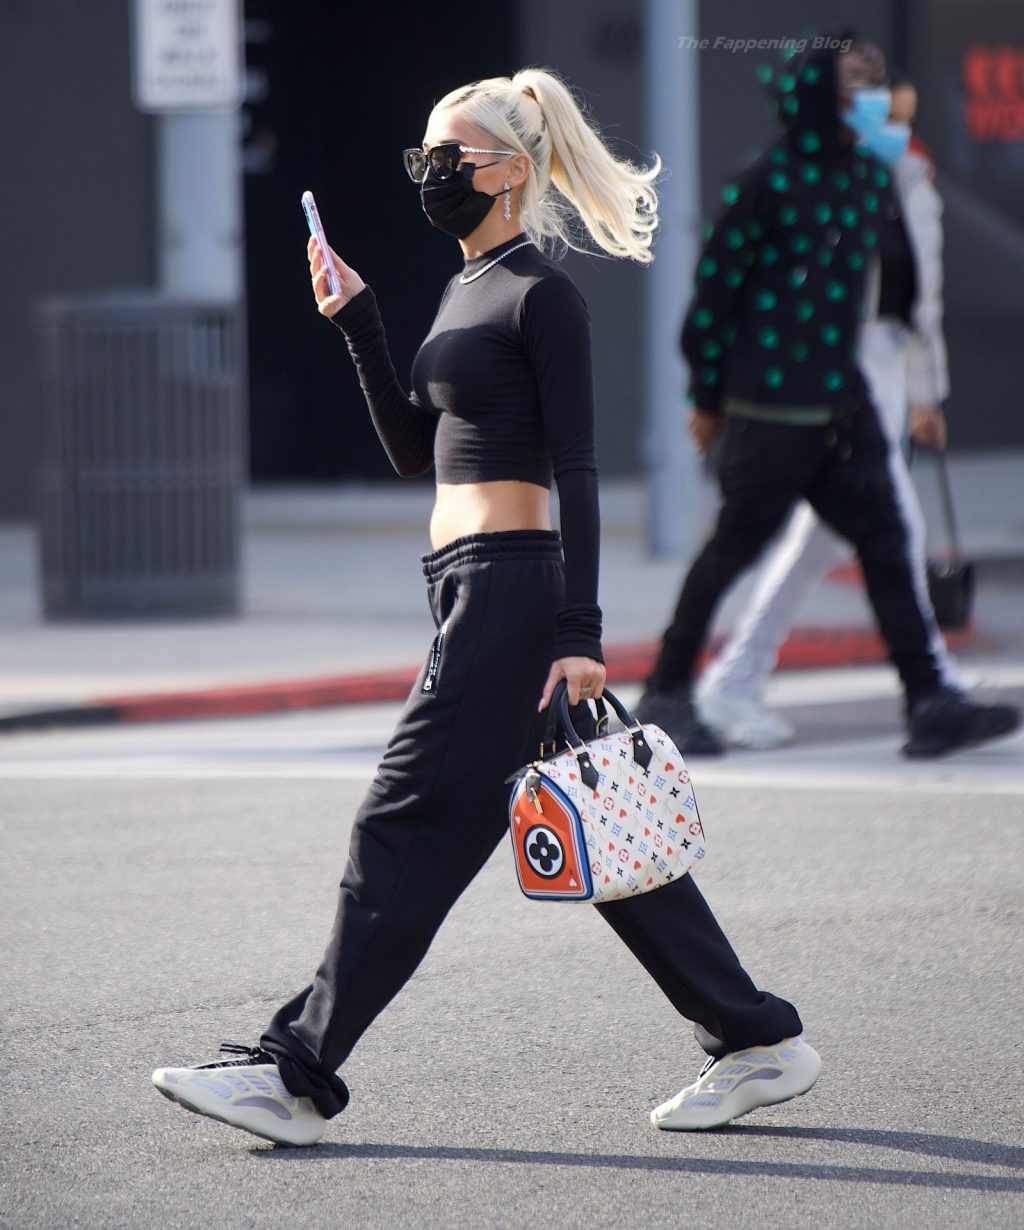 Pia Mia Displays Her Abs and Pokies in New York (20 Photos)